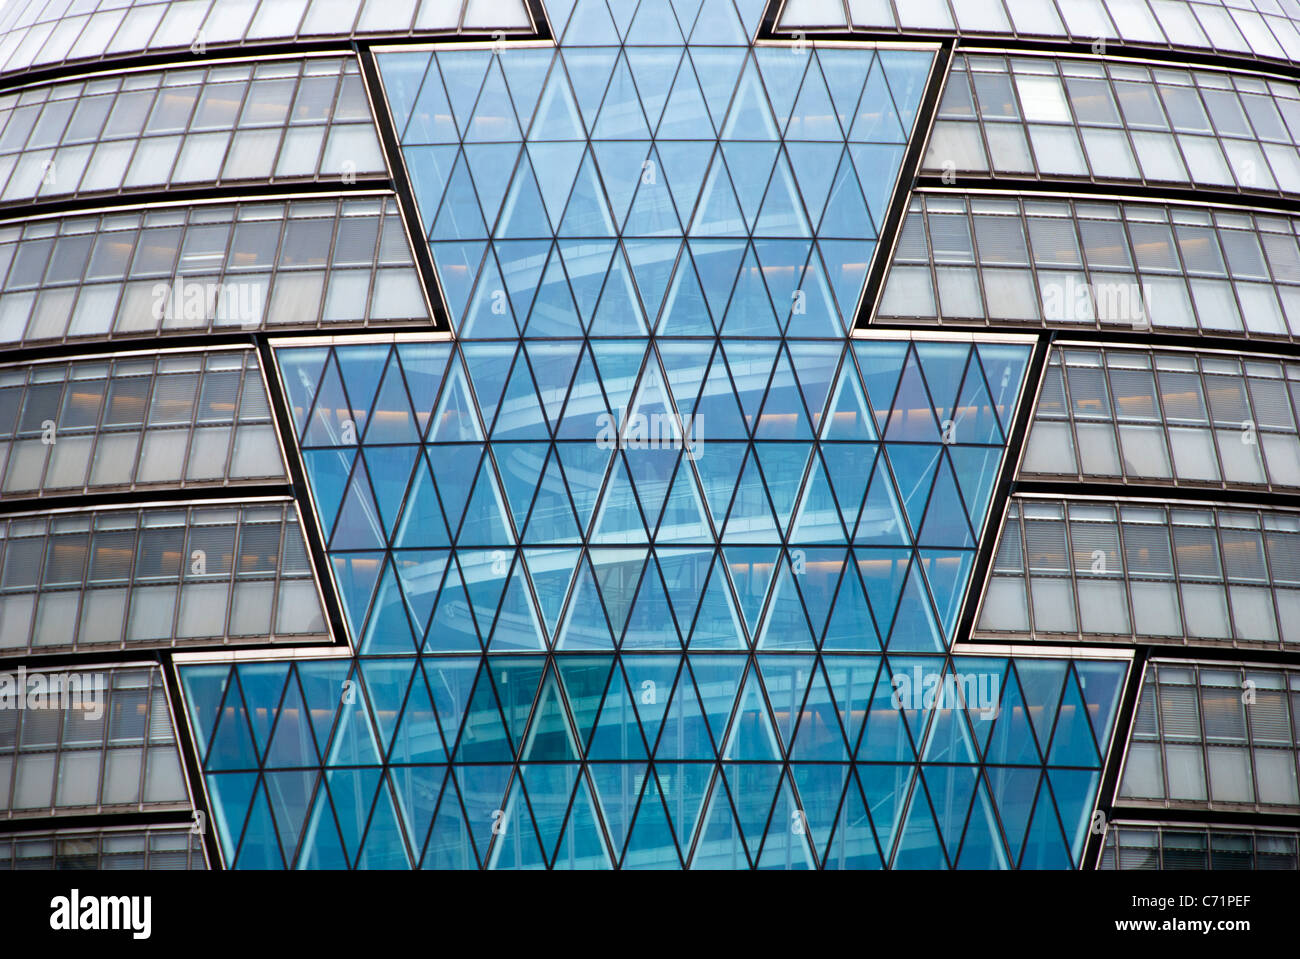 Facade of the City Hall in London Stock Photo